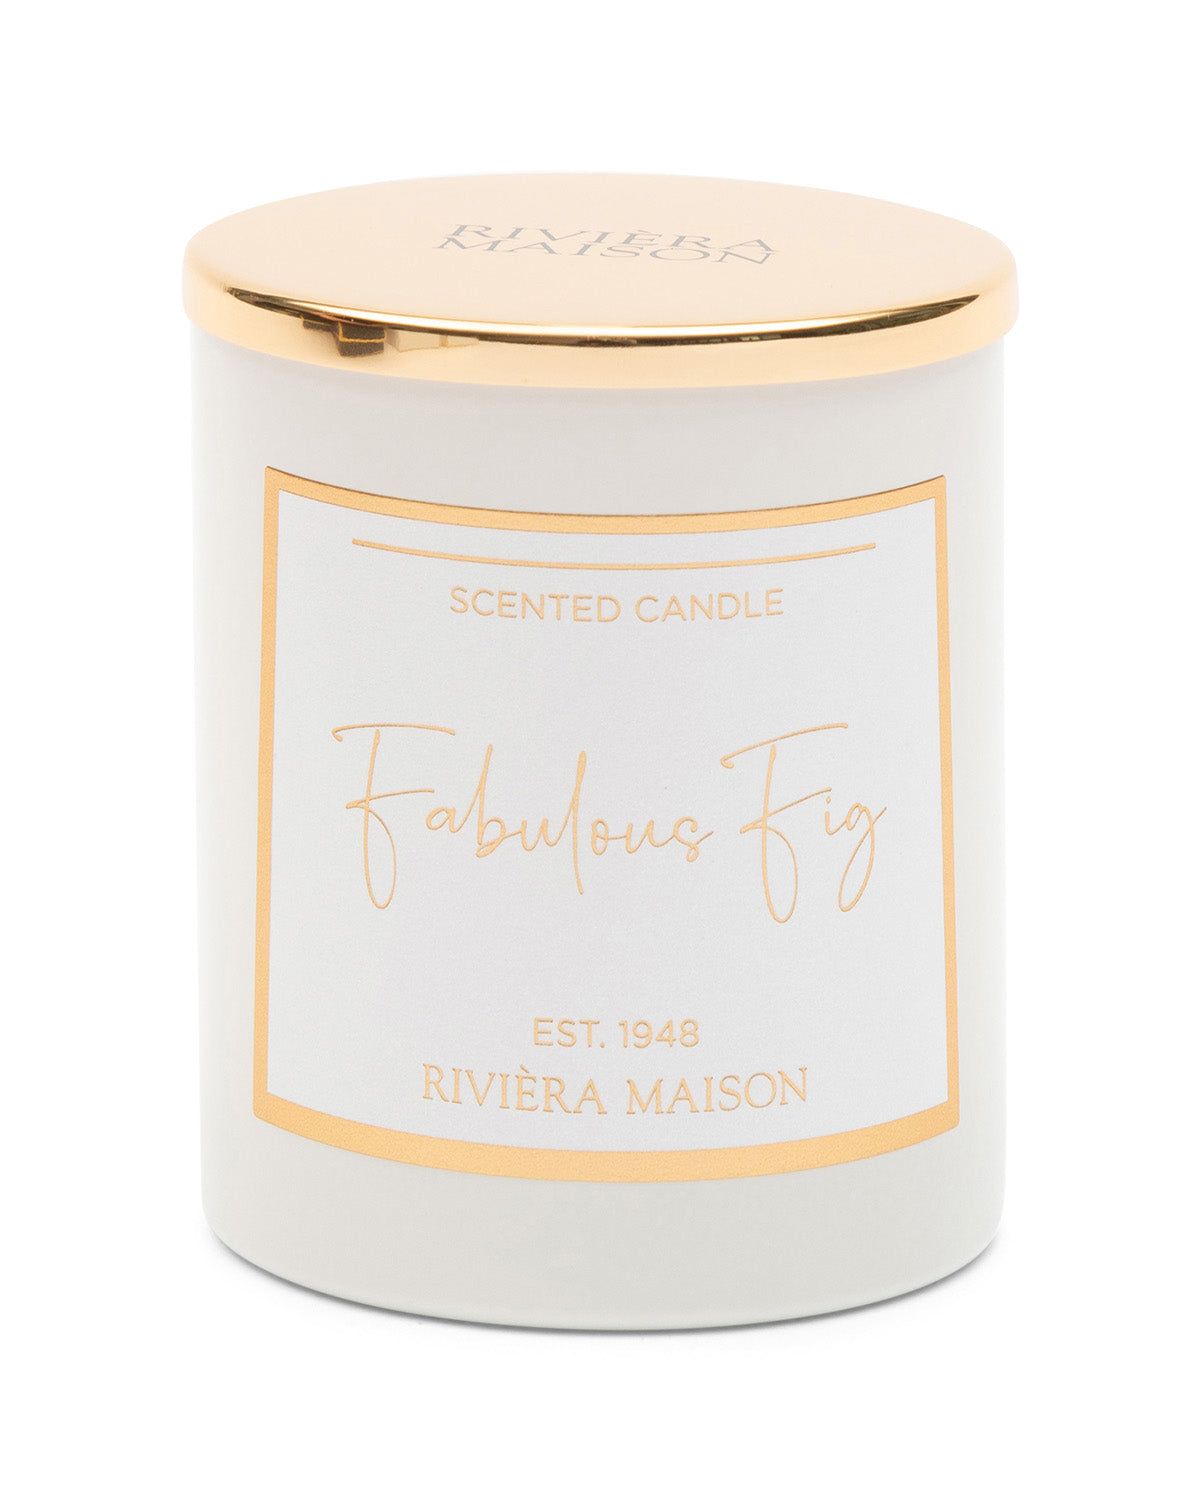 FIG SCENTED CANDLE, cedar, and peony in a white glass by Riviera Maison